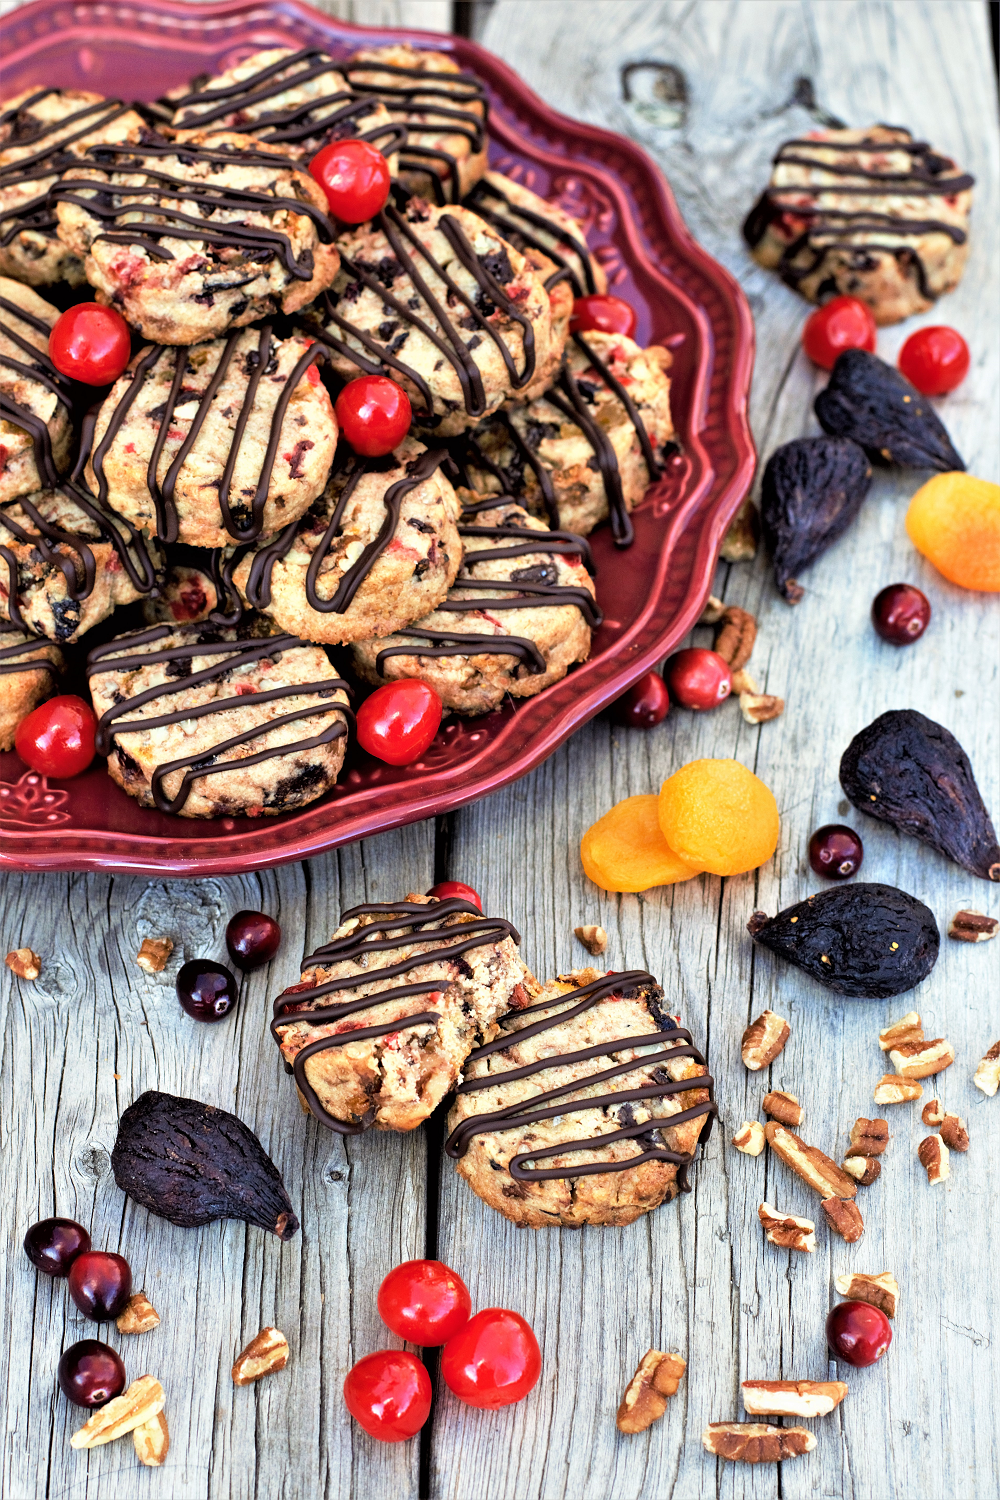 Dried fruits, chopped nuts, dark chocolate, and a hint of brandy shine in light & crunchy shortbread-style cookies - give fruitcake a chance this year!